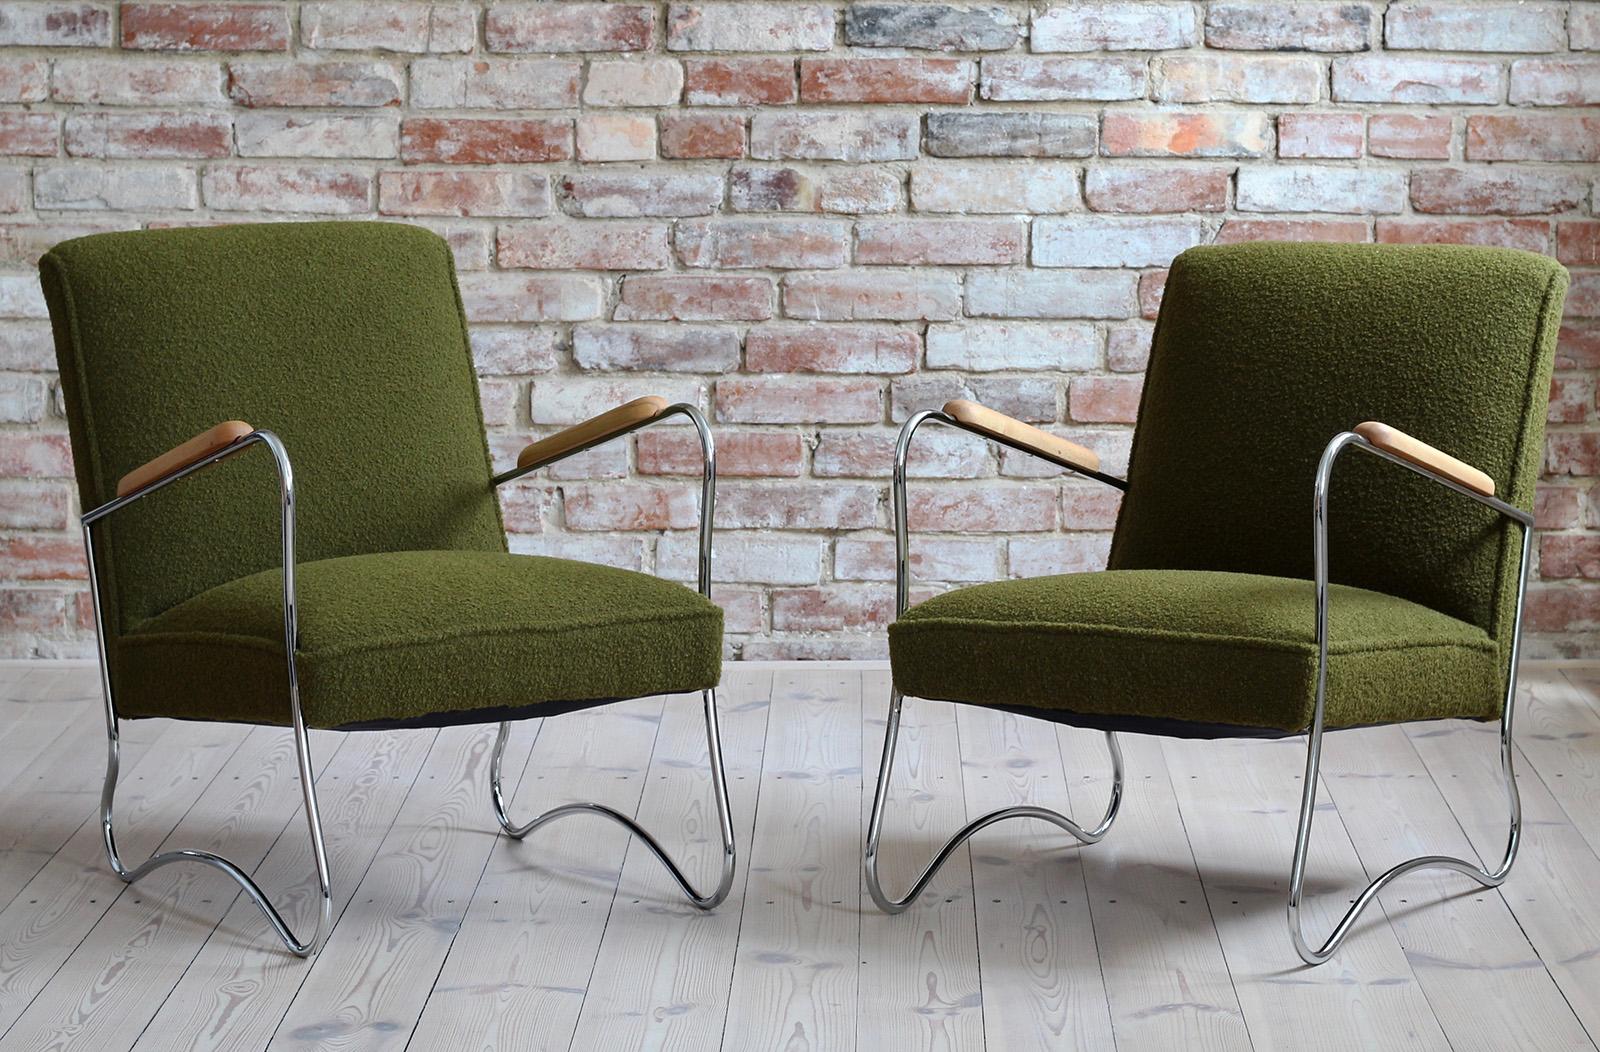 Set of 2 armchairs from Furniture Factory “Wschód” Zadziele. They were produced in 1950s in eastern Poland however the design is very much western-like and reminds of the best Bauhaus designs of 20th century. Very light in form and comfortable in